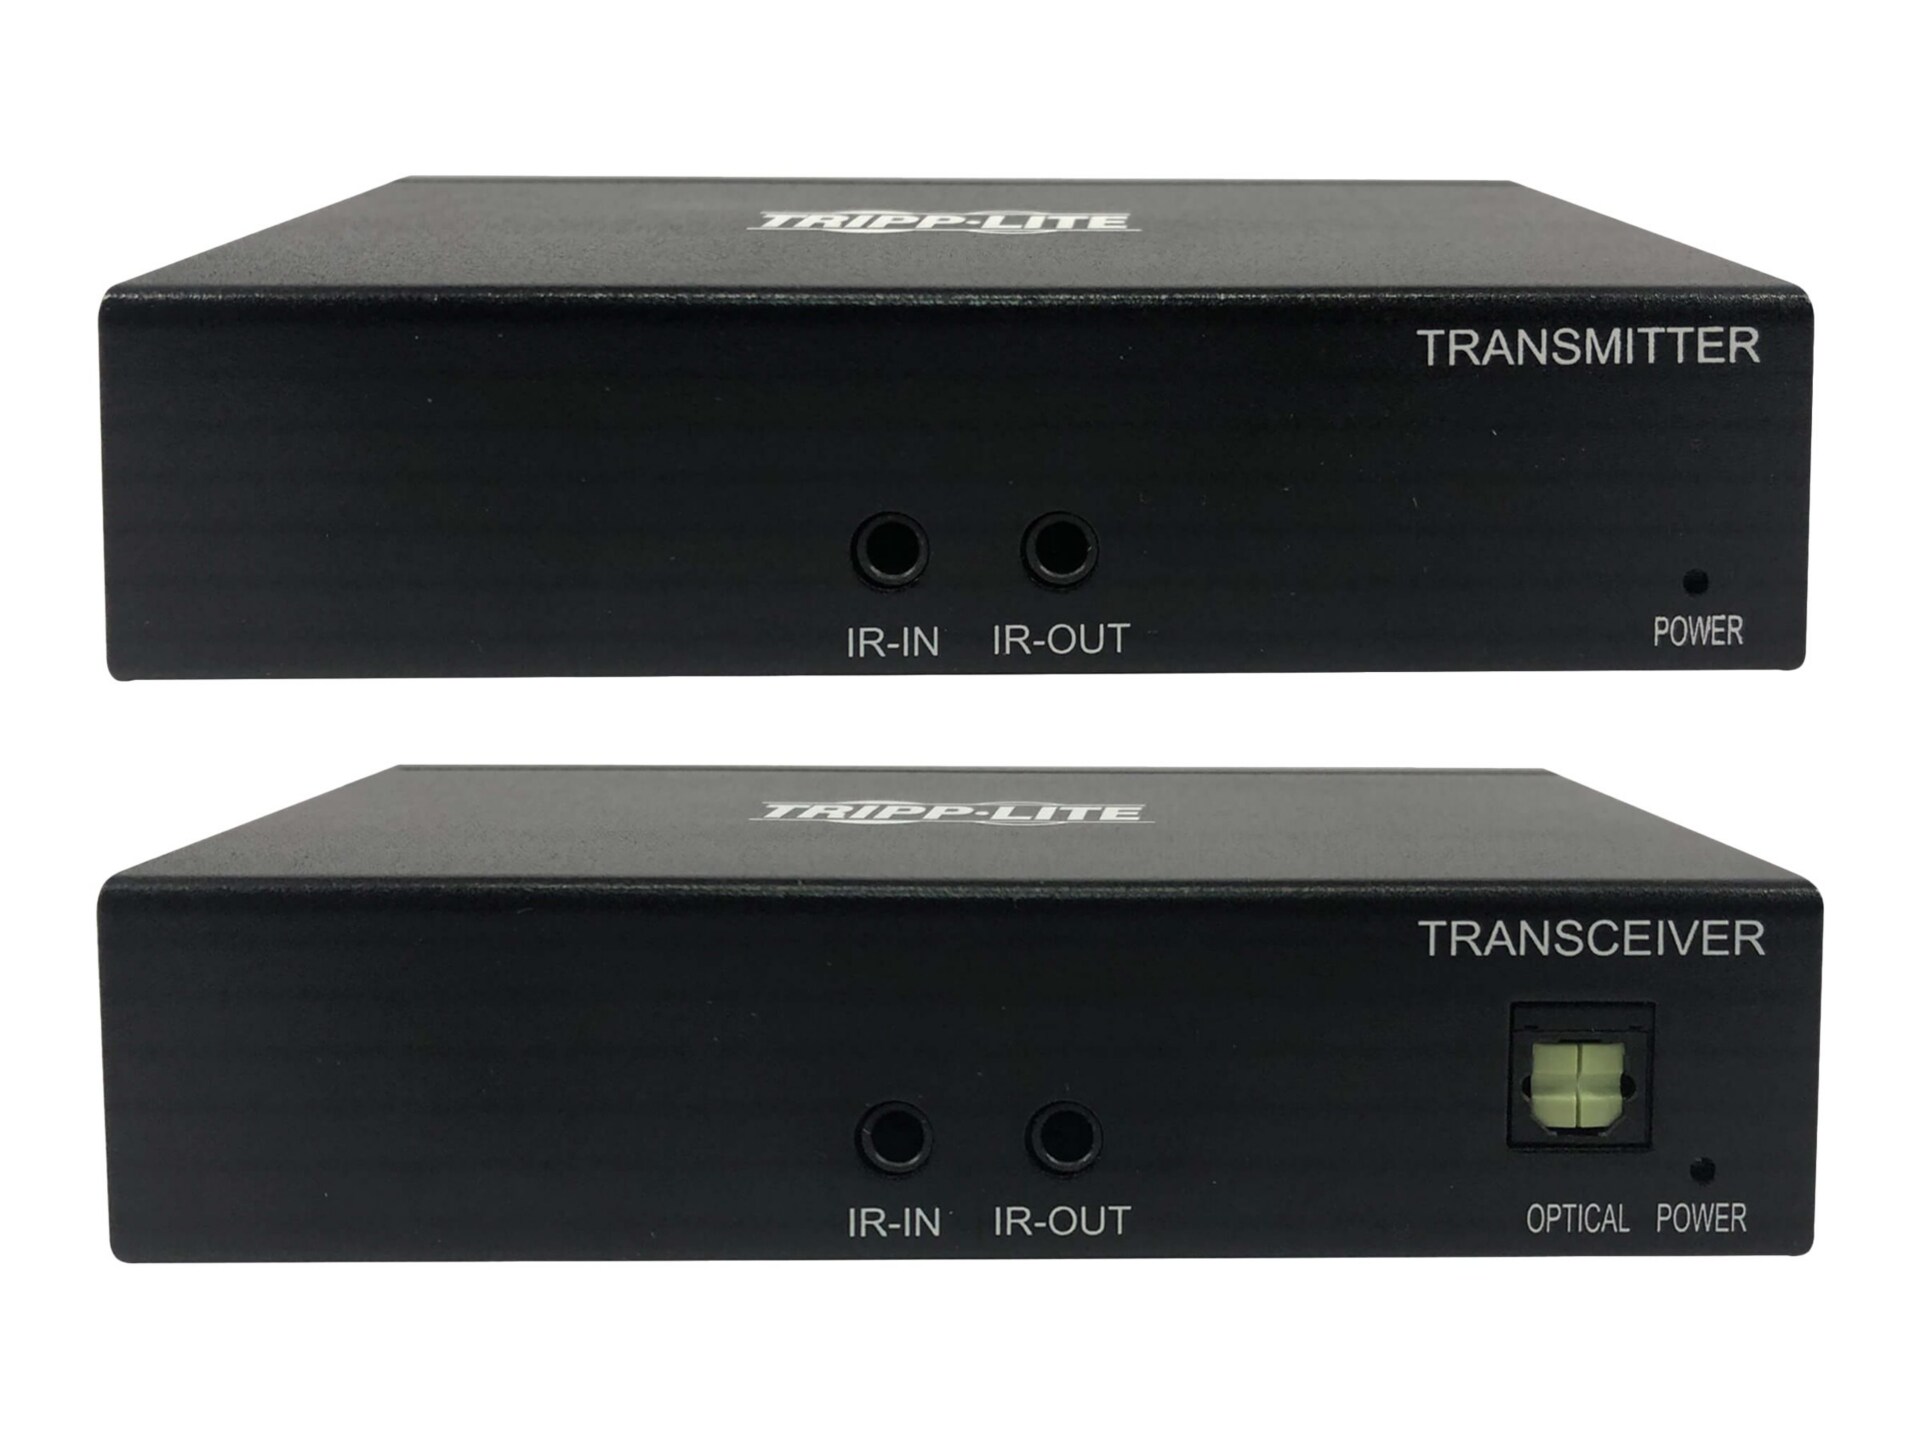 Tripp Lite HDMI over Cat6 Extender Kit, Transmitter and Receiver with Repeater, 4K 60Hz, 4:4:4, IR, HDR, PoC, 70 m., TAA